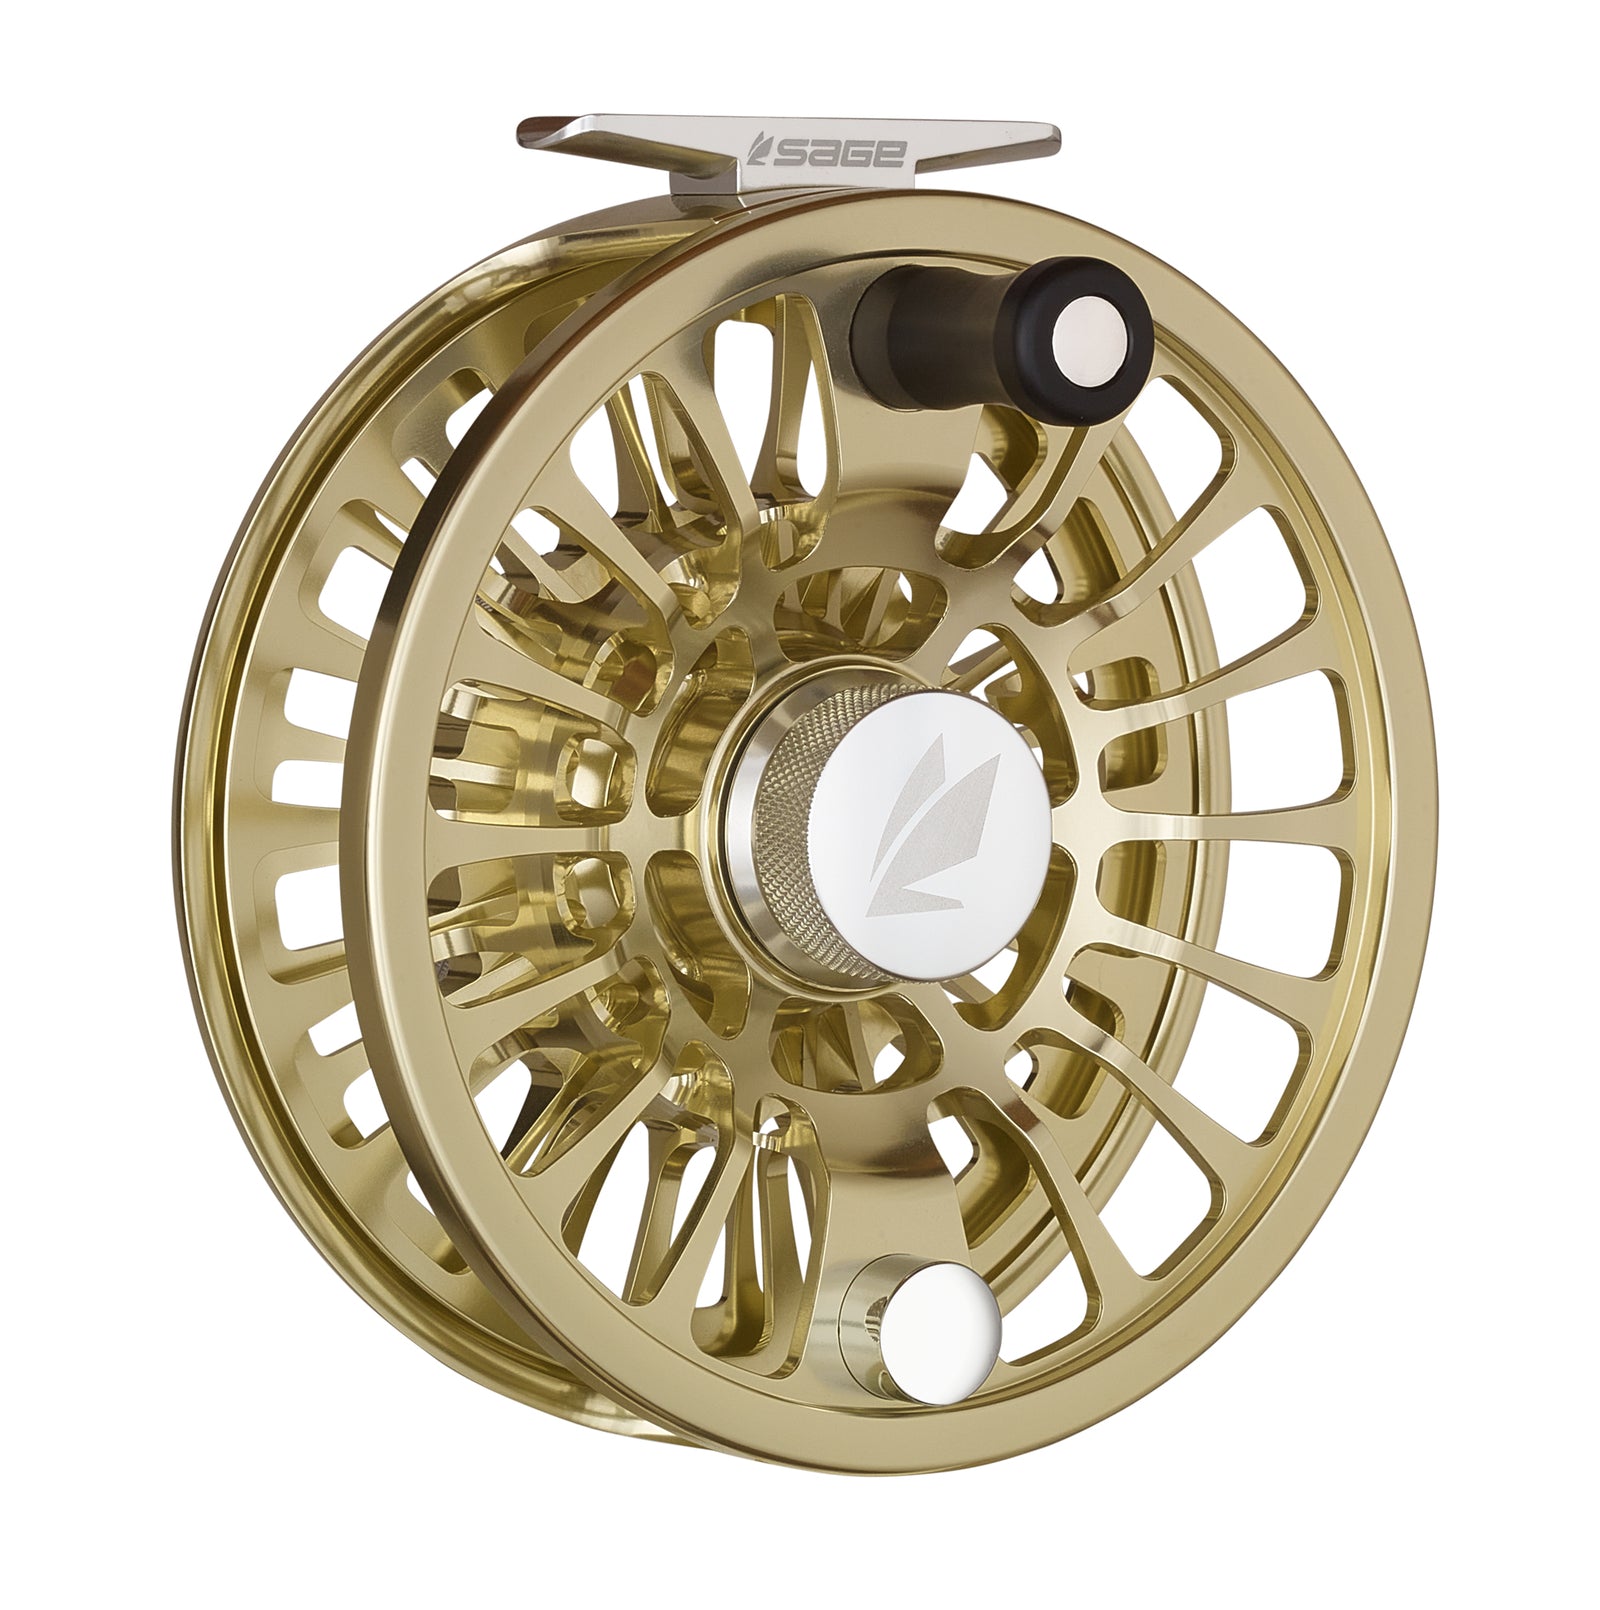 Shop Sage Reels: Enforcer, Thermo, and More